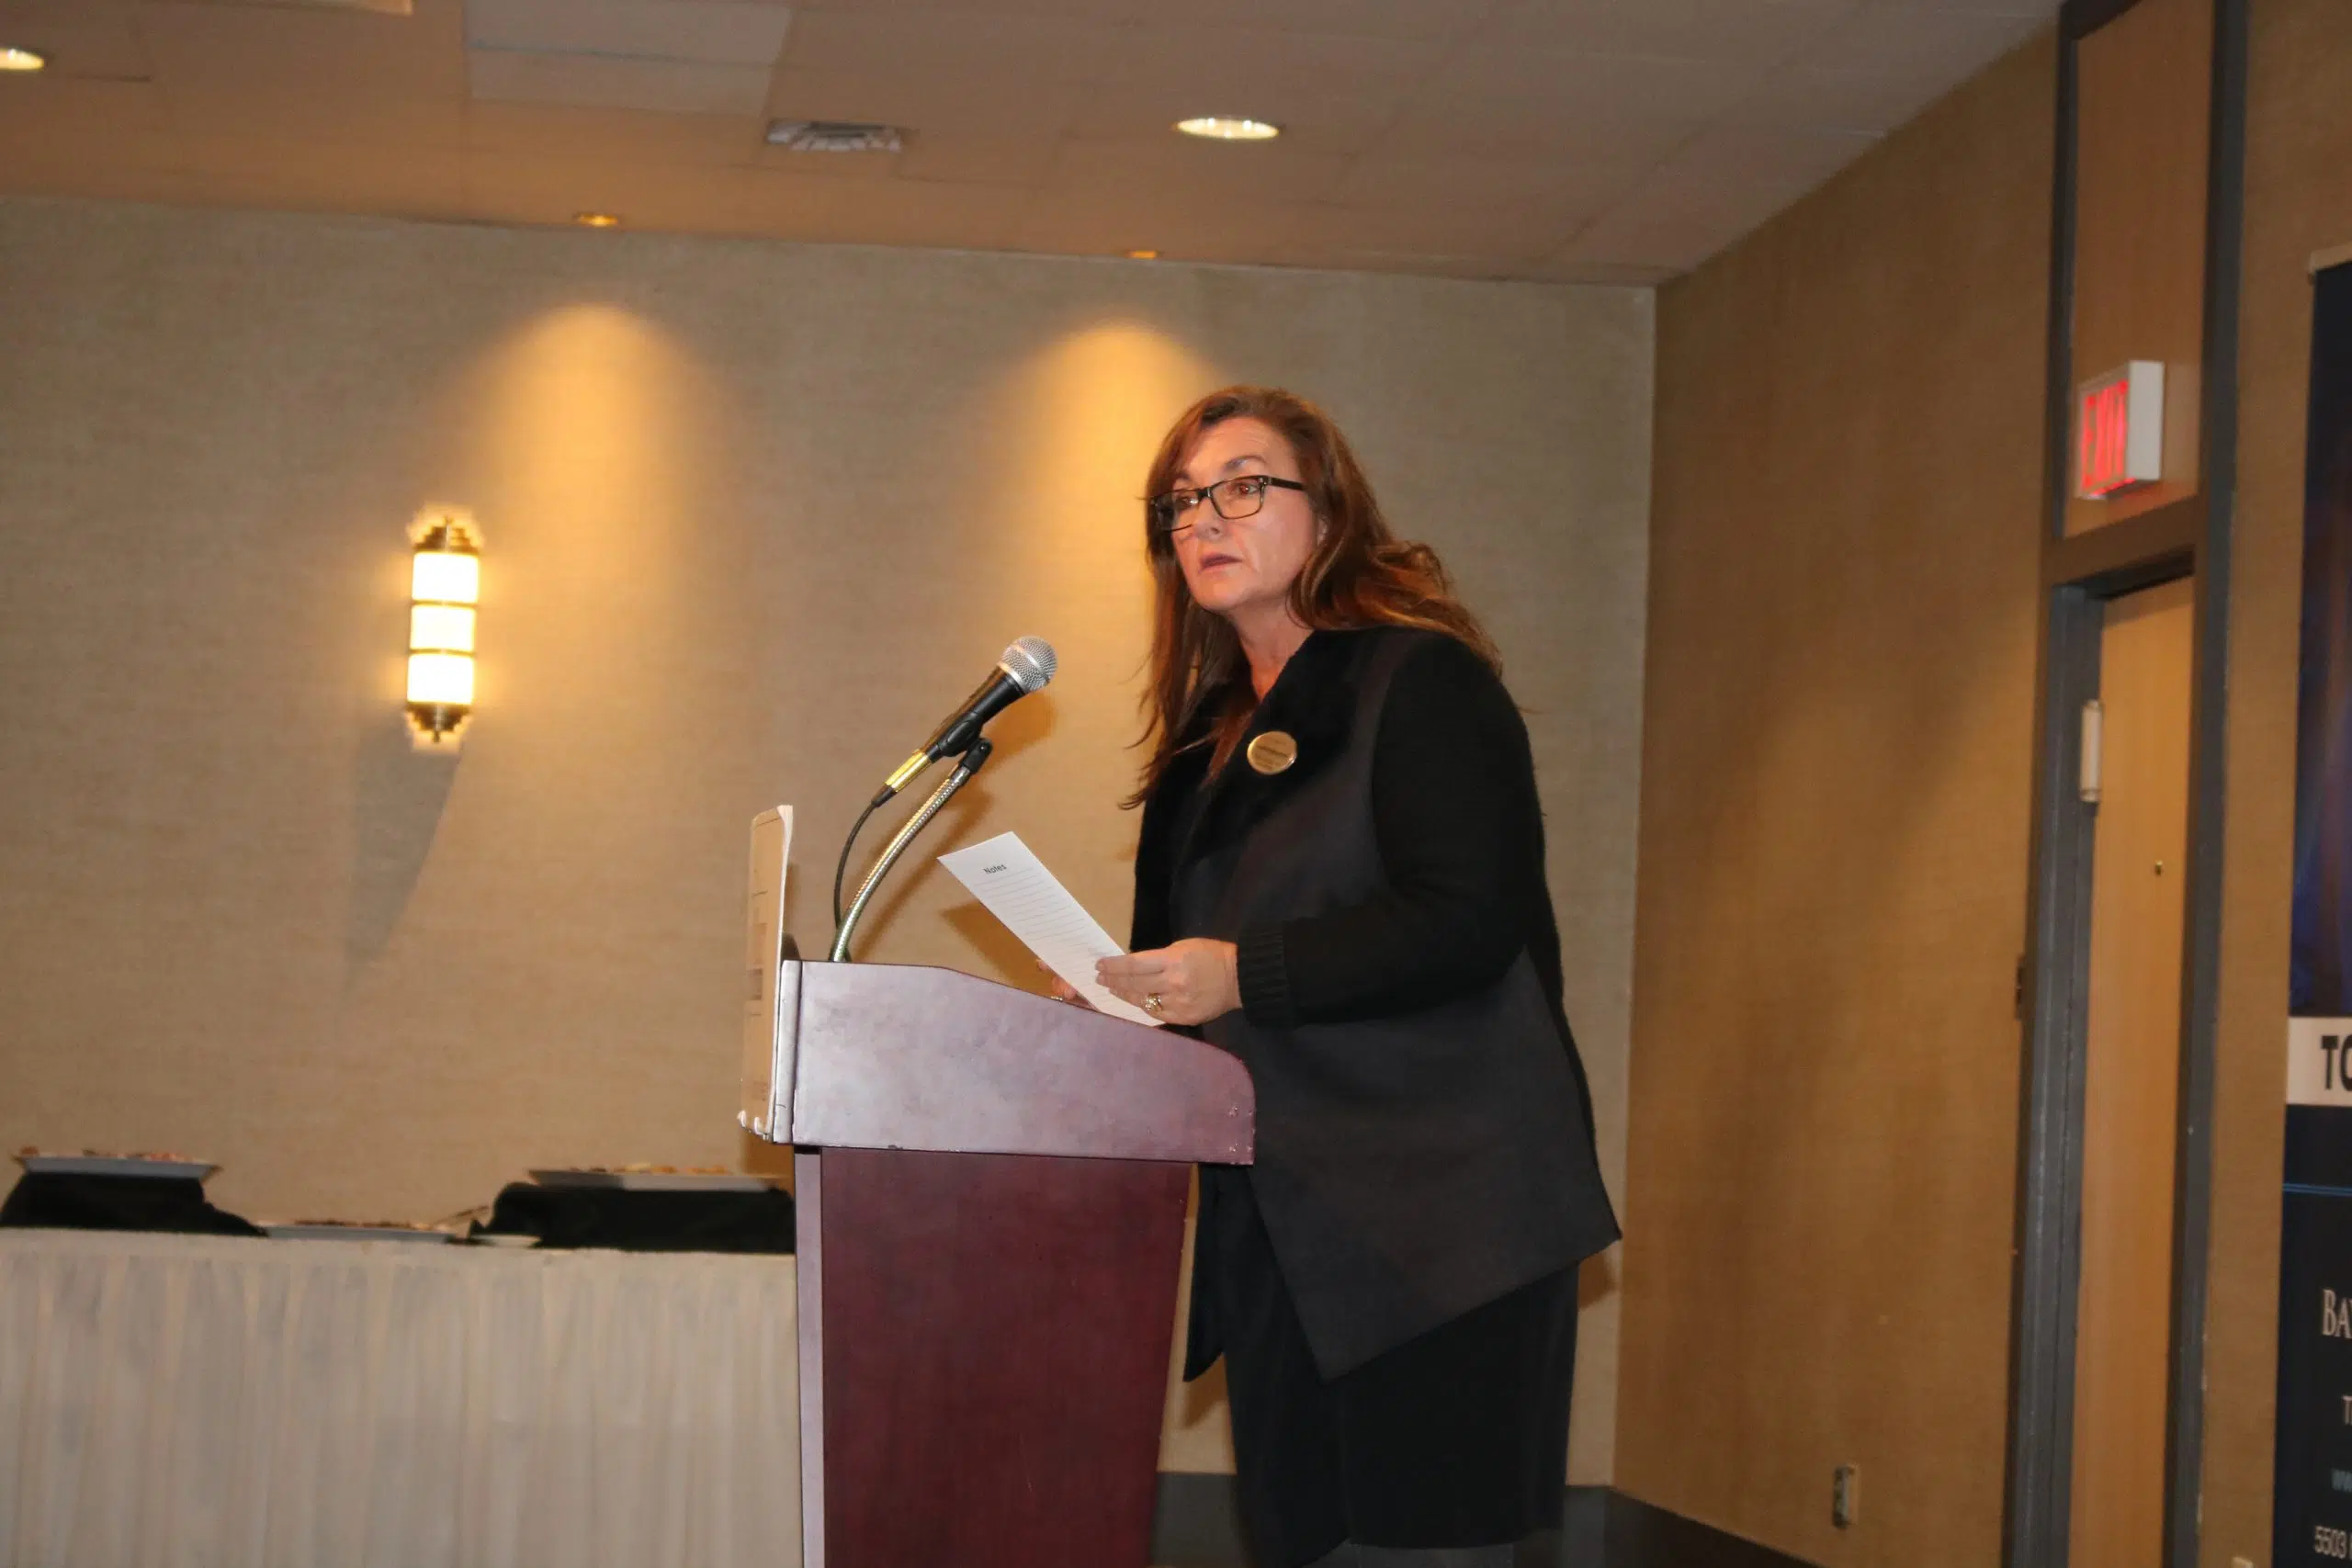 Quinte West Chamber Manager reacts to Ontario fiscal update